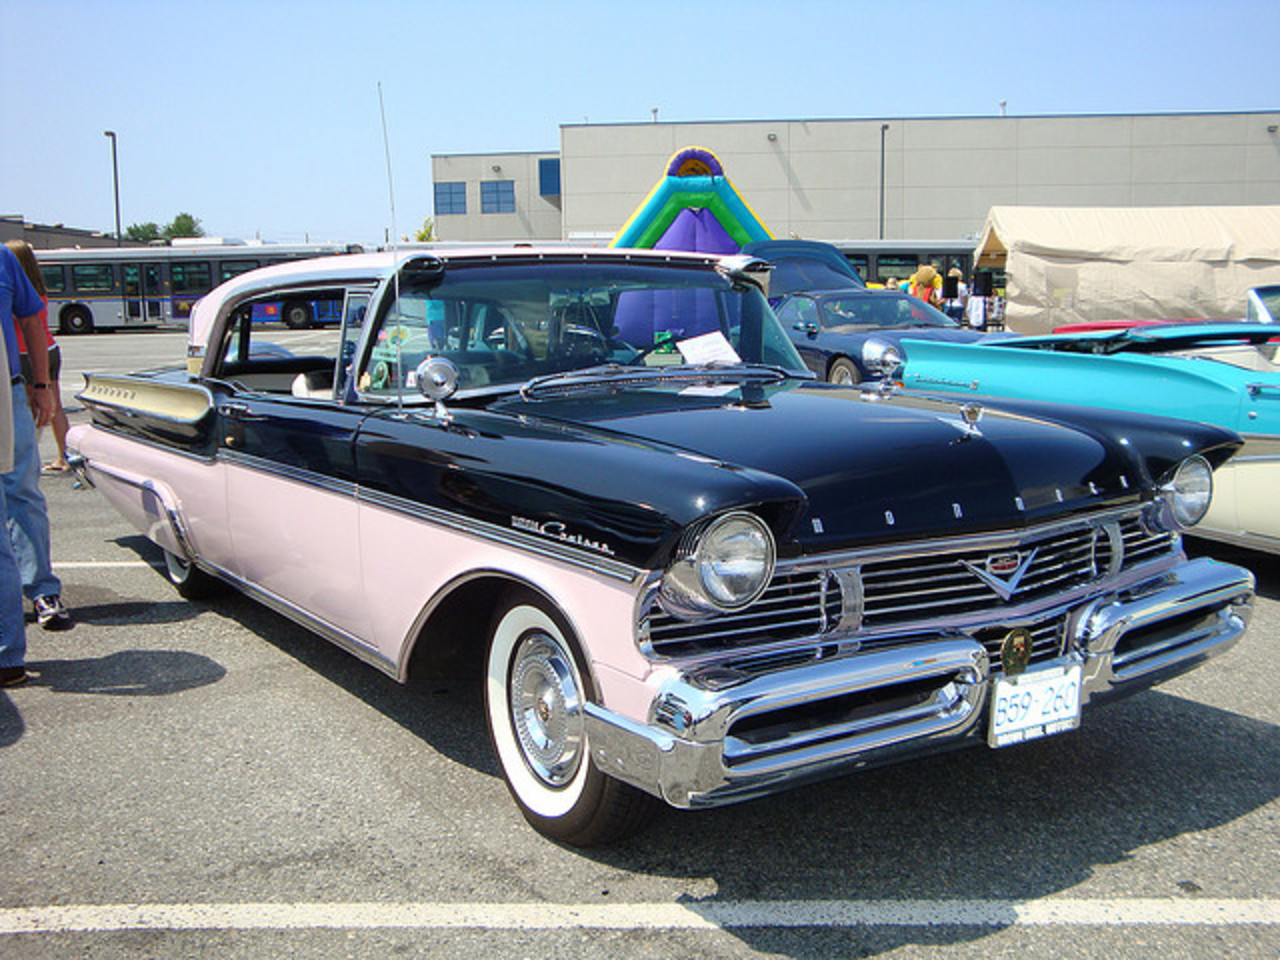 1957 Monarch Turnpike Cruiser (Ford of Canada) | Flickr - Photo ...